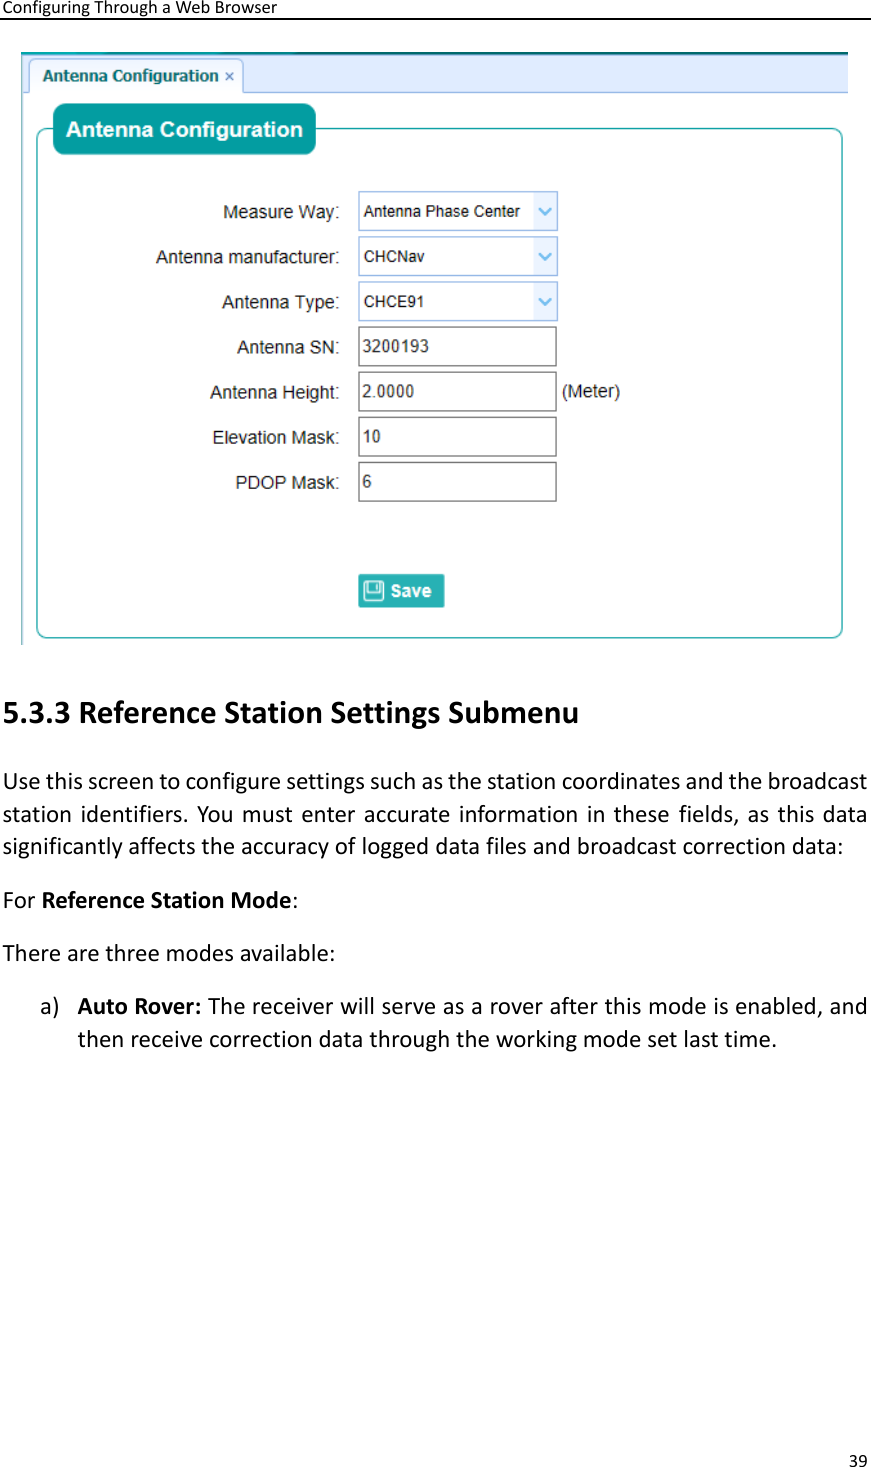 Configuring Through a Web Browser 39   5.3.3 Reference Station Settings Submenu Use this screen to configure settings such as the station coordinates and the broadcast station identifiers. You must enter accurate information in these  fields, as this data significantly affects the accuracy of logged data files and broadcast correction data:   For Reference Station Mode: There are three modes available:   a) Auto Rover: The receiver will serve as a rover after this mode is enabled, and then receive correction data through the working mode set last time. 